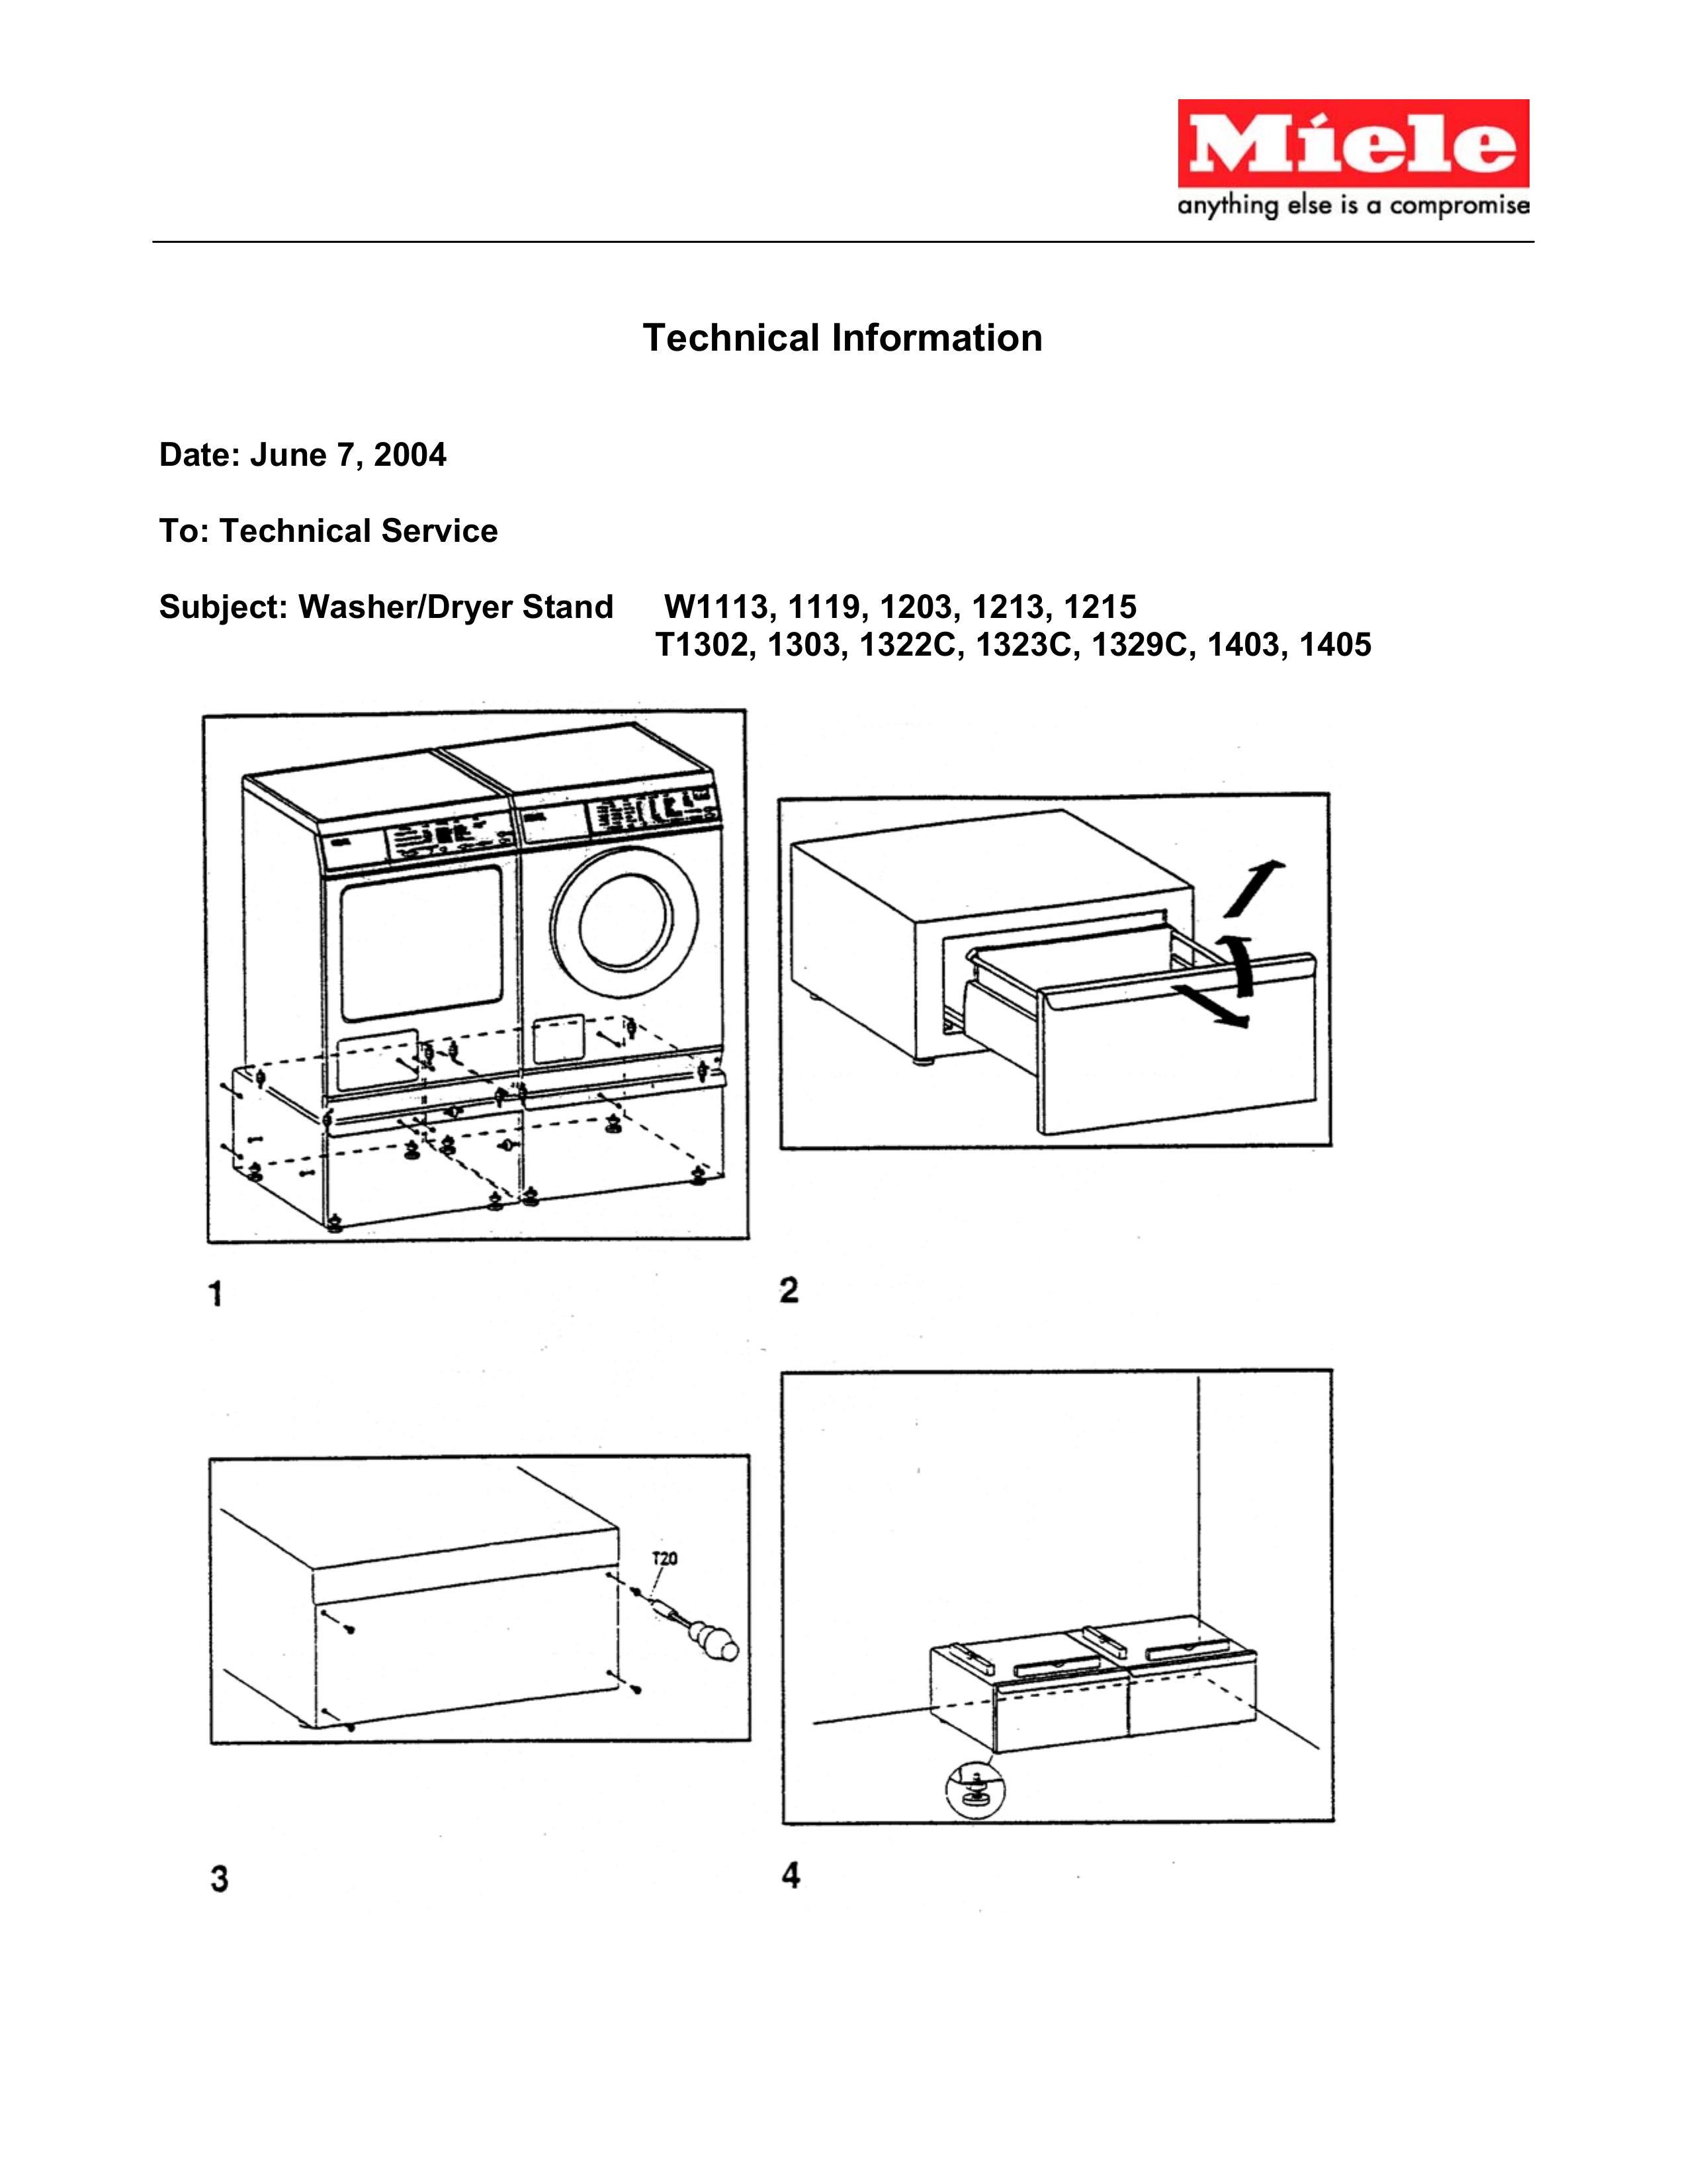 Miele T1403 Washer Accessories User Manual